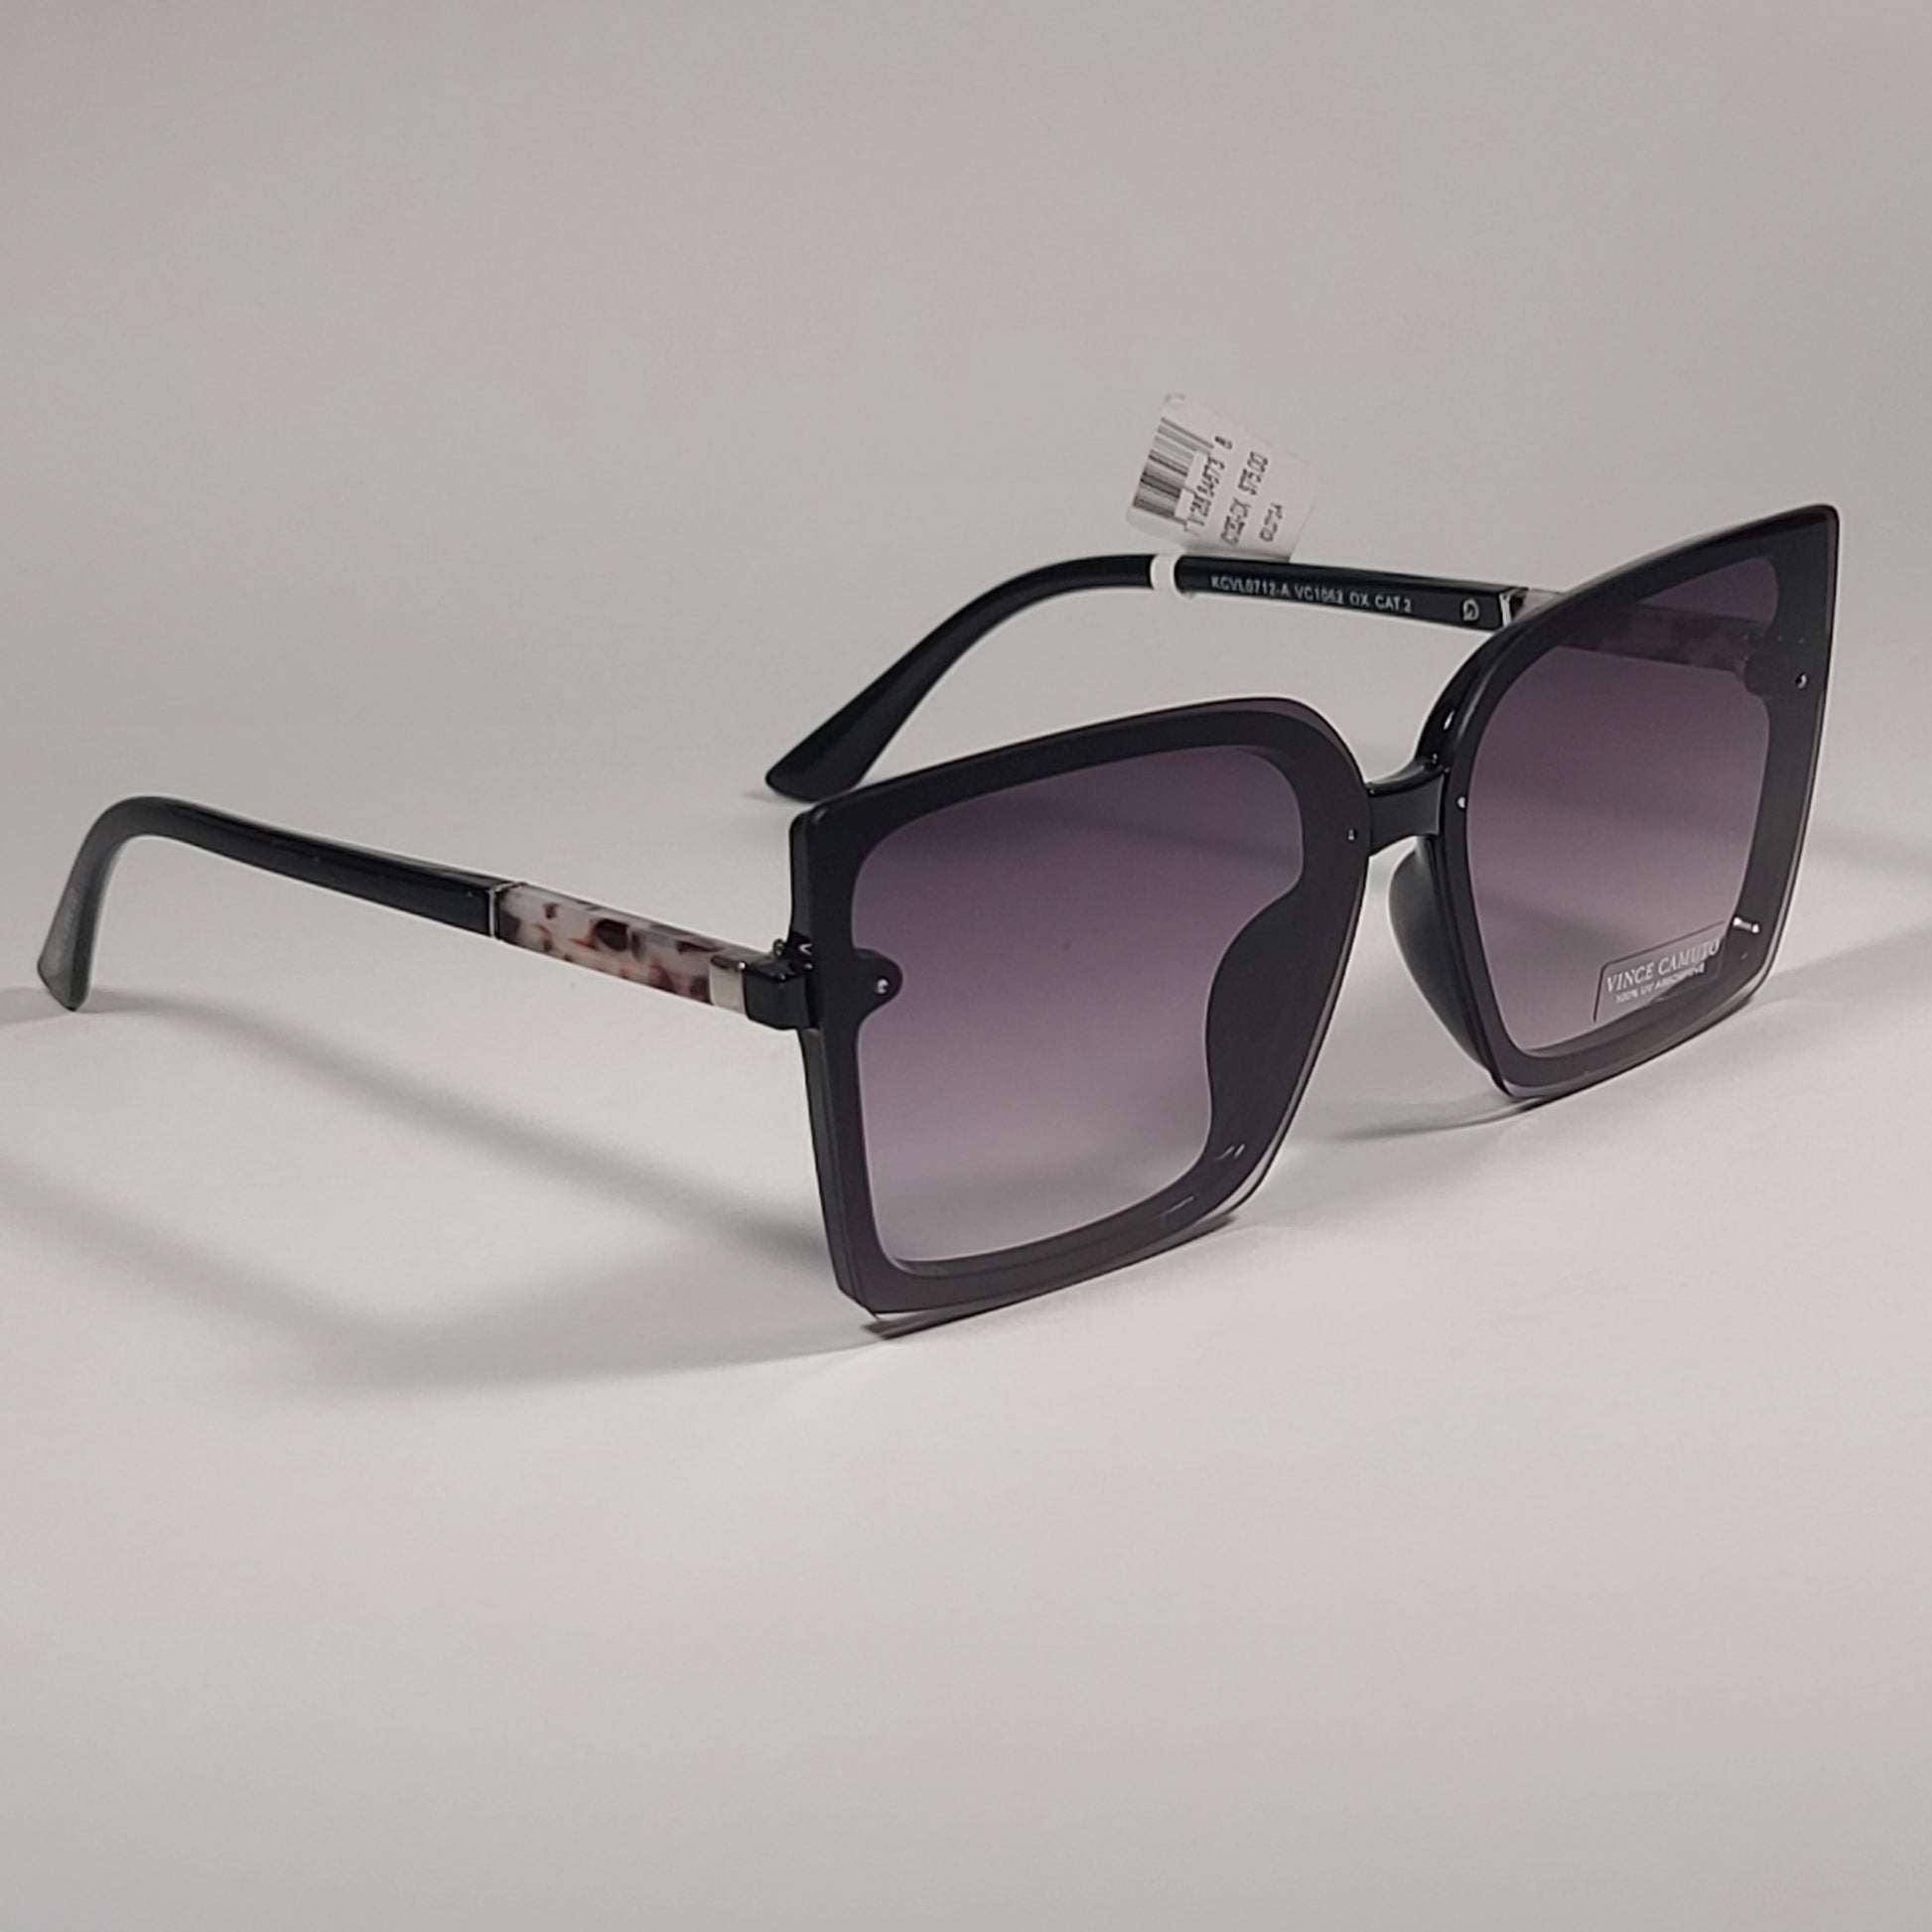 Vince Camuto VC1062 OX Butterfly Sunglasses Black Frame Gray Gradient Lens - Sunglasses